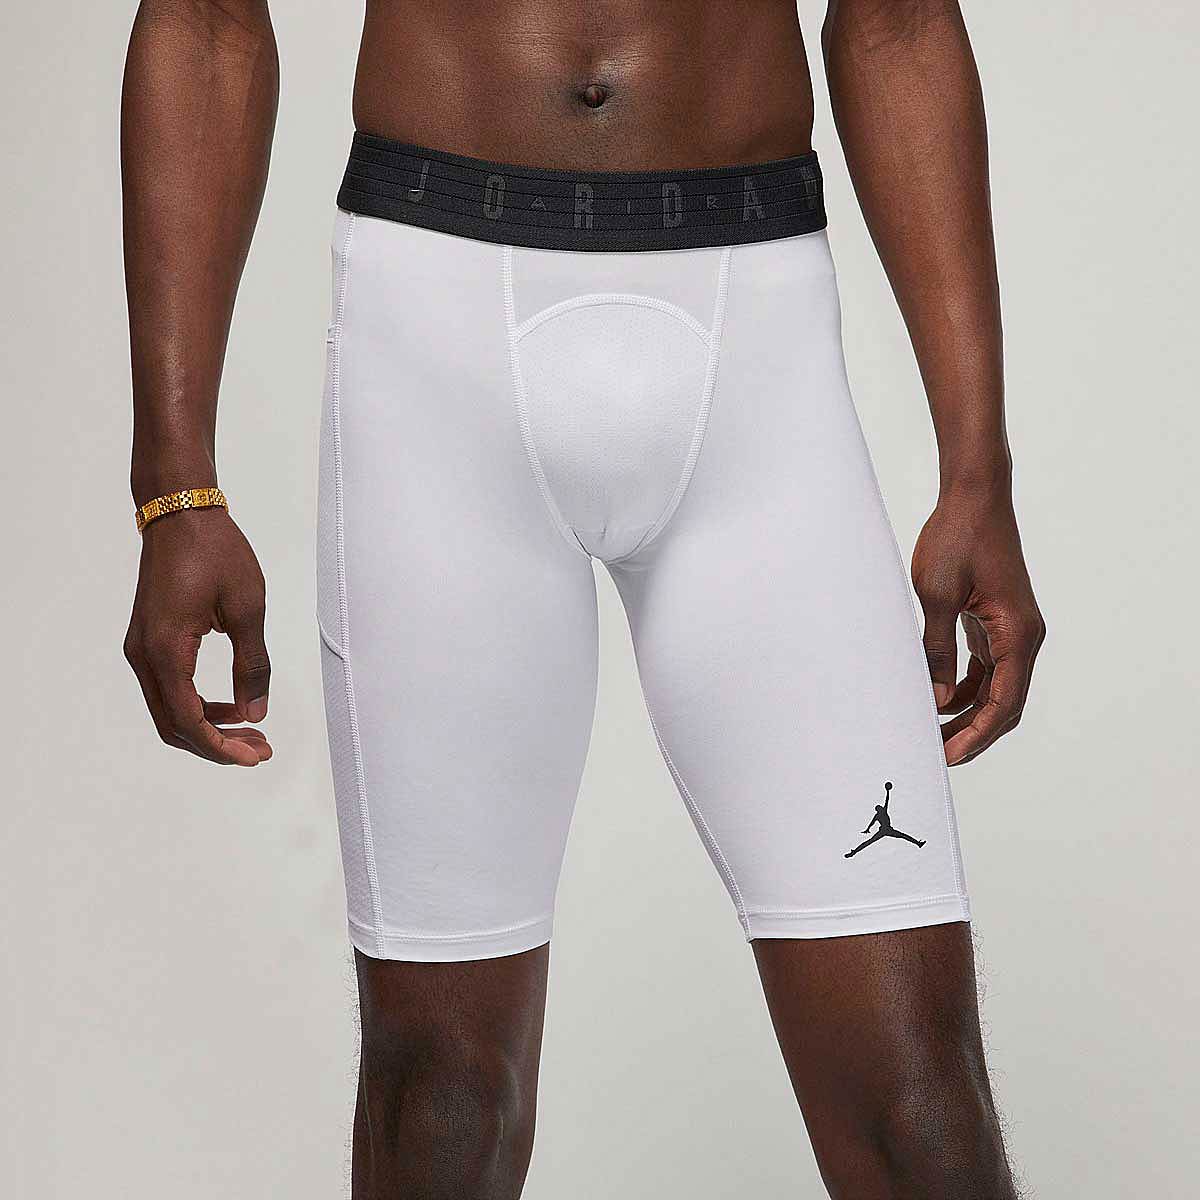 Buy DRI-FIT SPORTS COMPRESSION SHORTS for N/A 0.0 on !